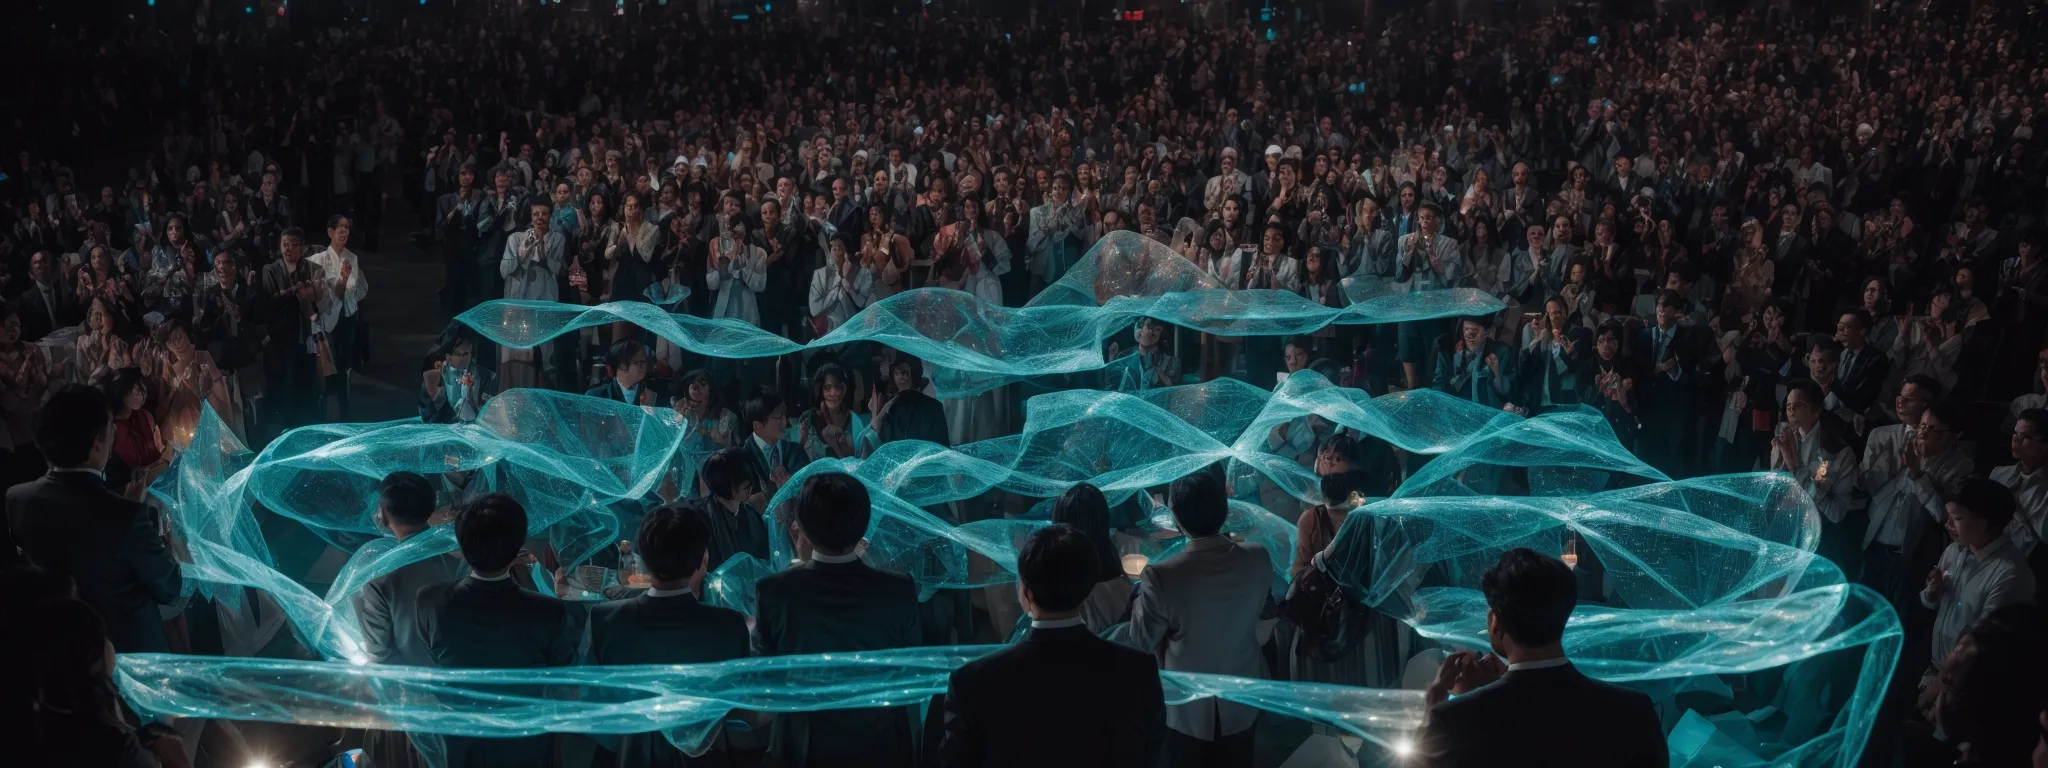 a wide-eyed audience applauds as an innovator on stage unveils a translucent, glowing hologram depicting interconnected neural networks.